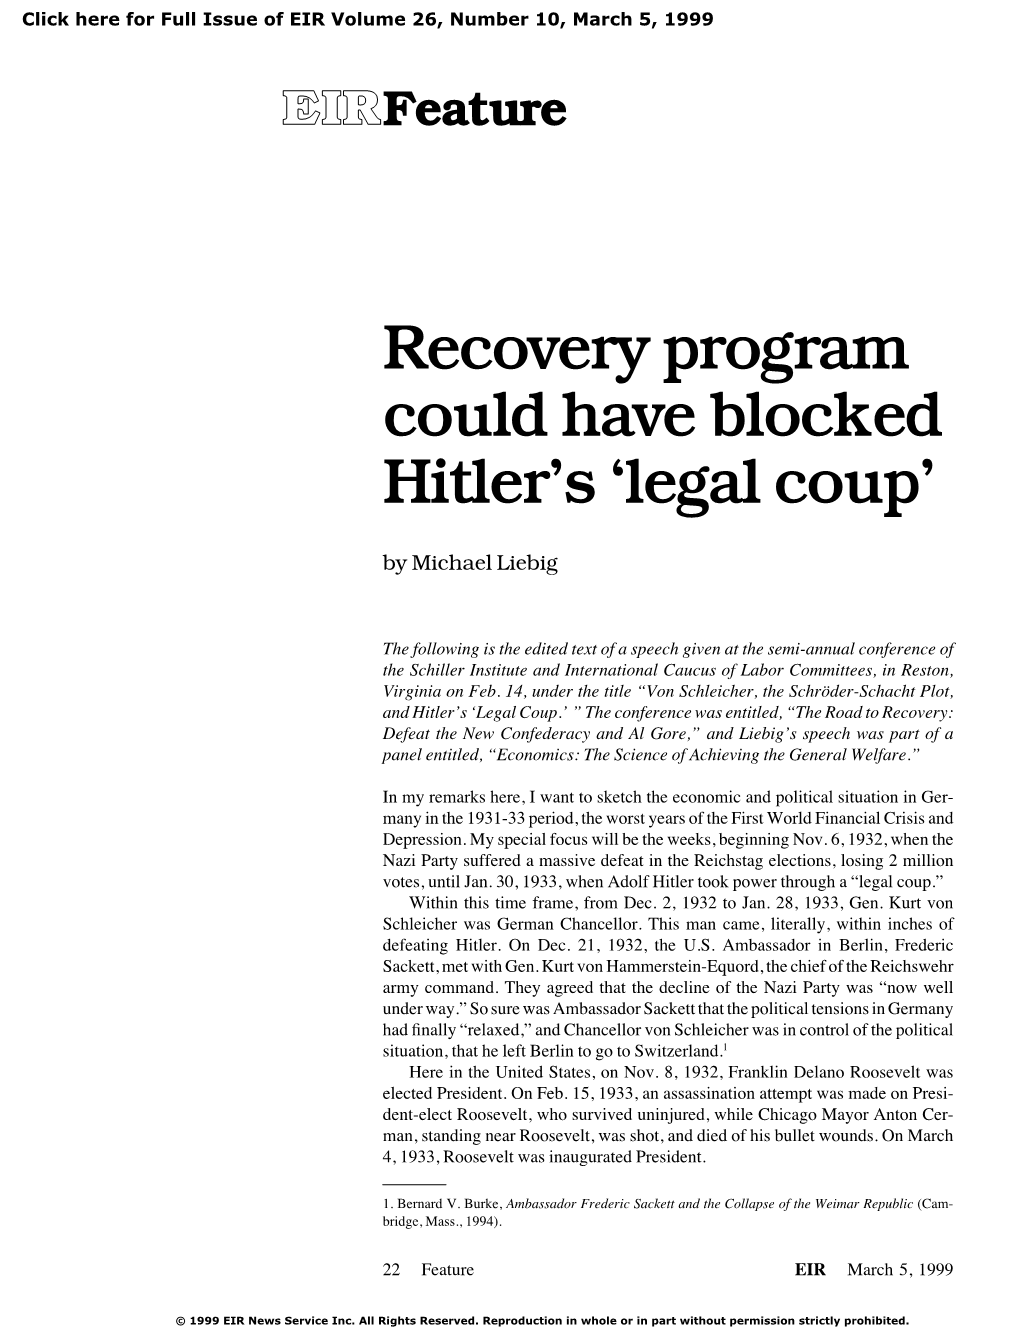 Recovery Program Could Have Blocked Hitler's